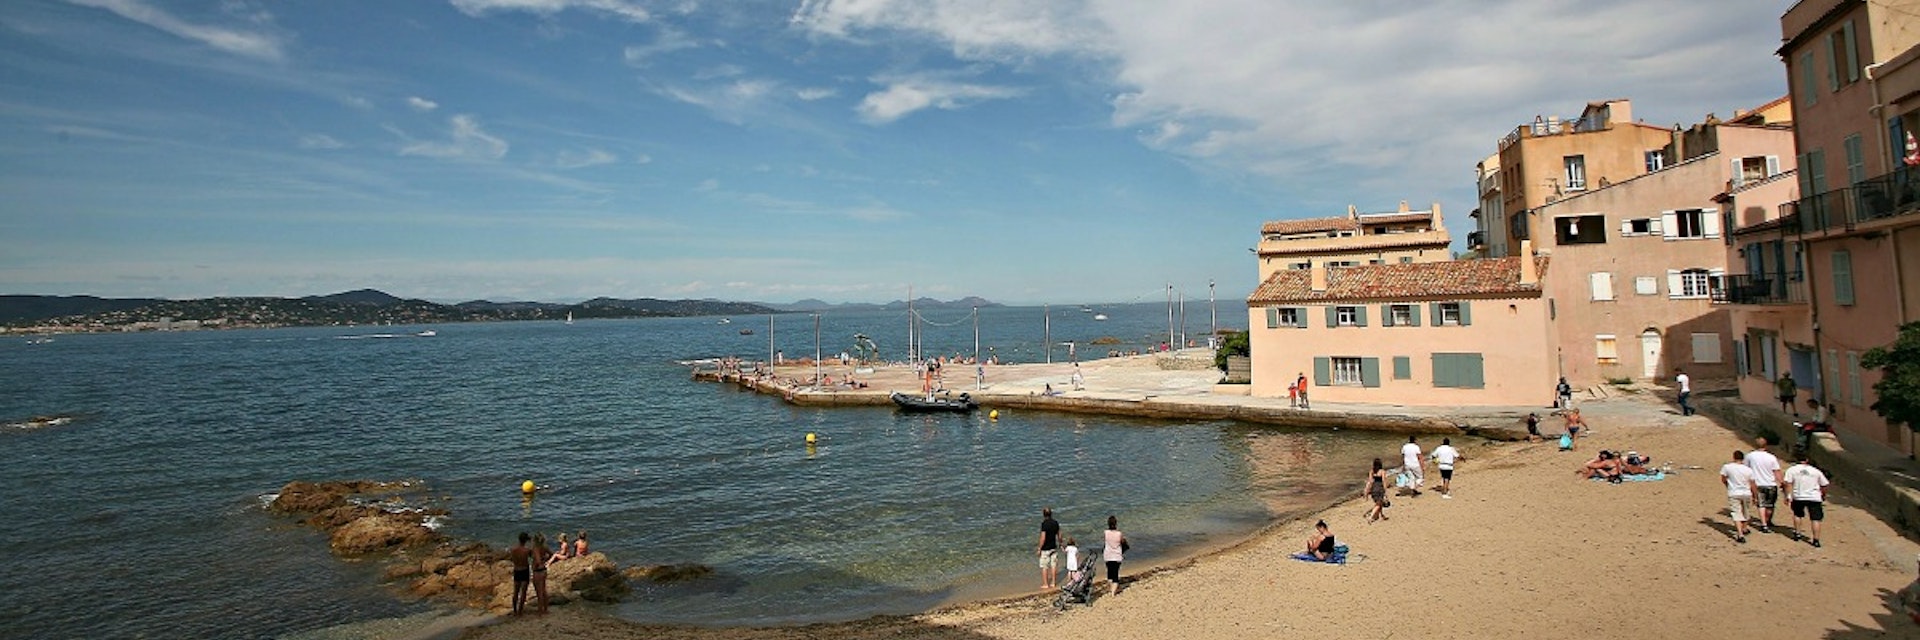 ST TROPEZ, FRANCE - AUGUST 09:  A general view of the 'La Ponche' area on August 9, 2011 in St Tropez, France.  (Photo by Marc Piasecki/Getty Images)